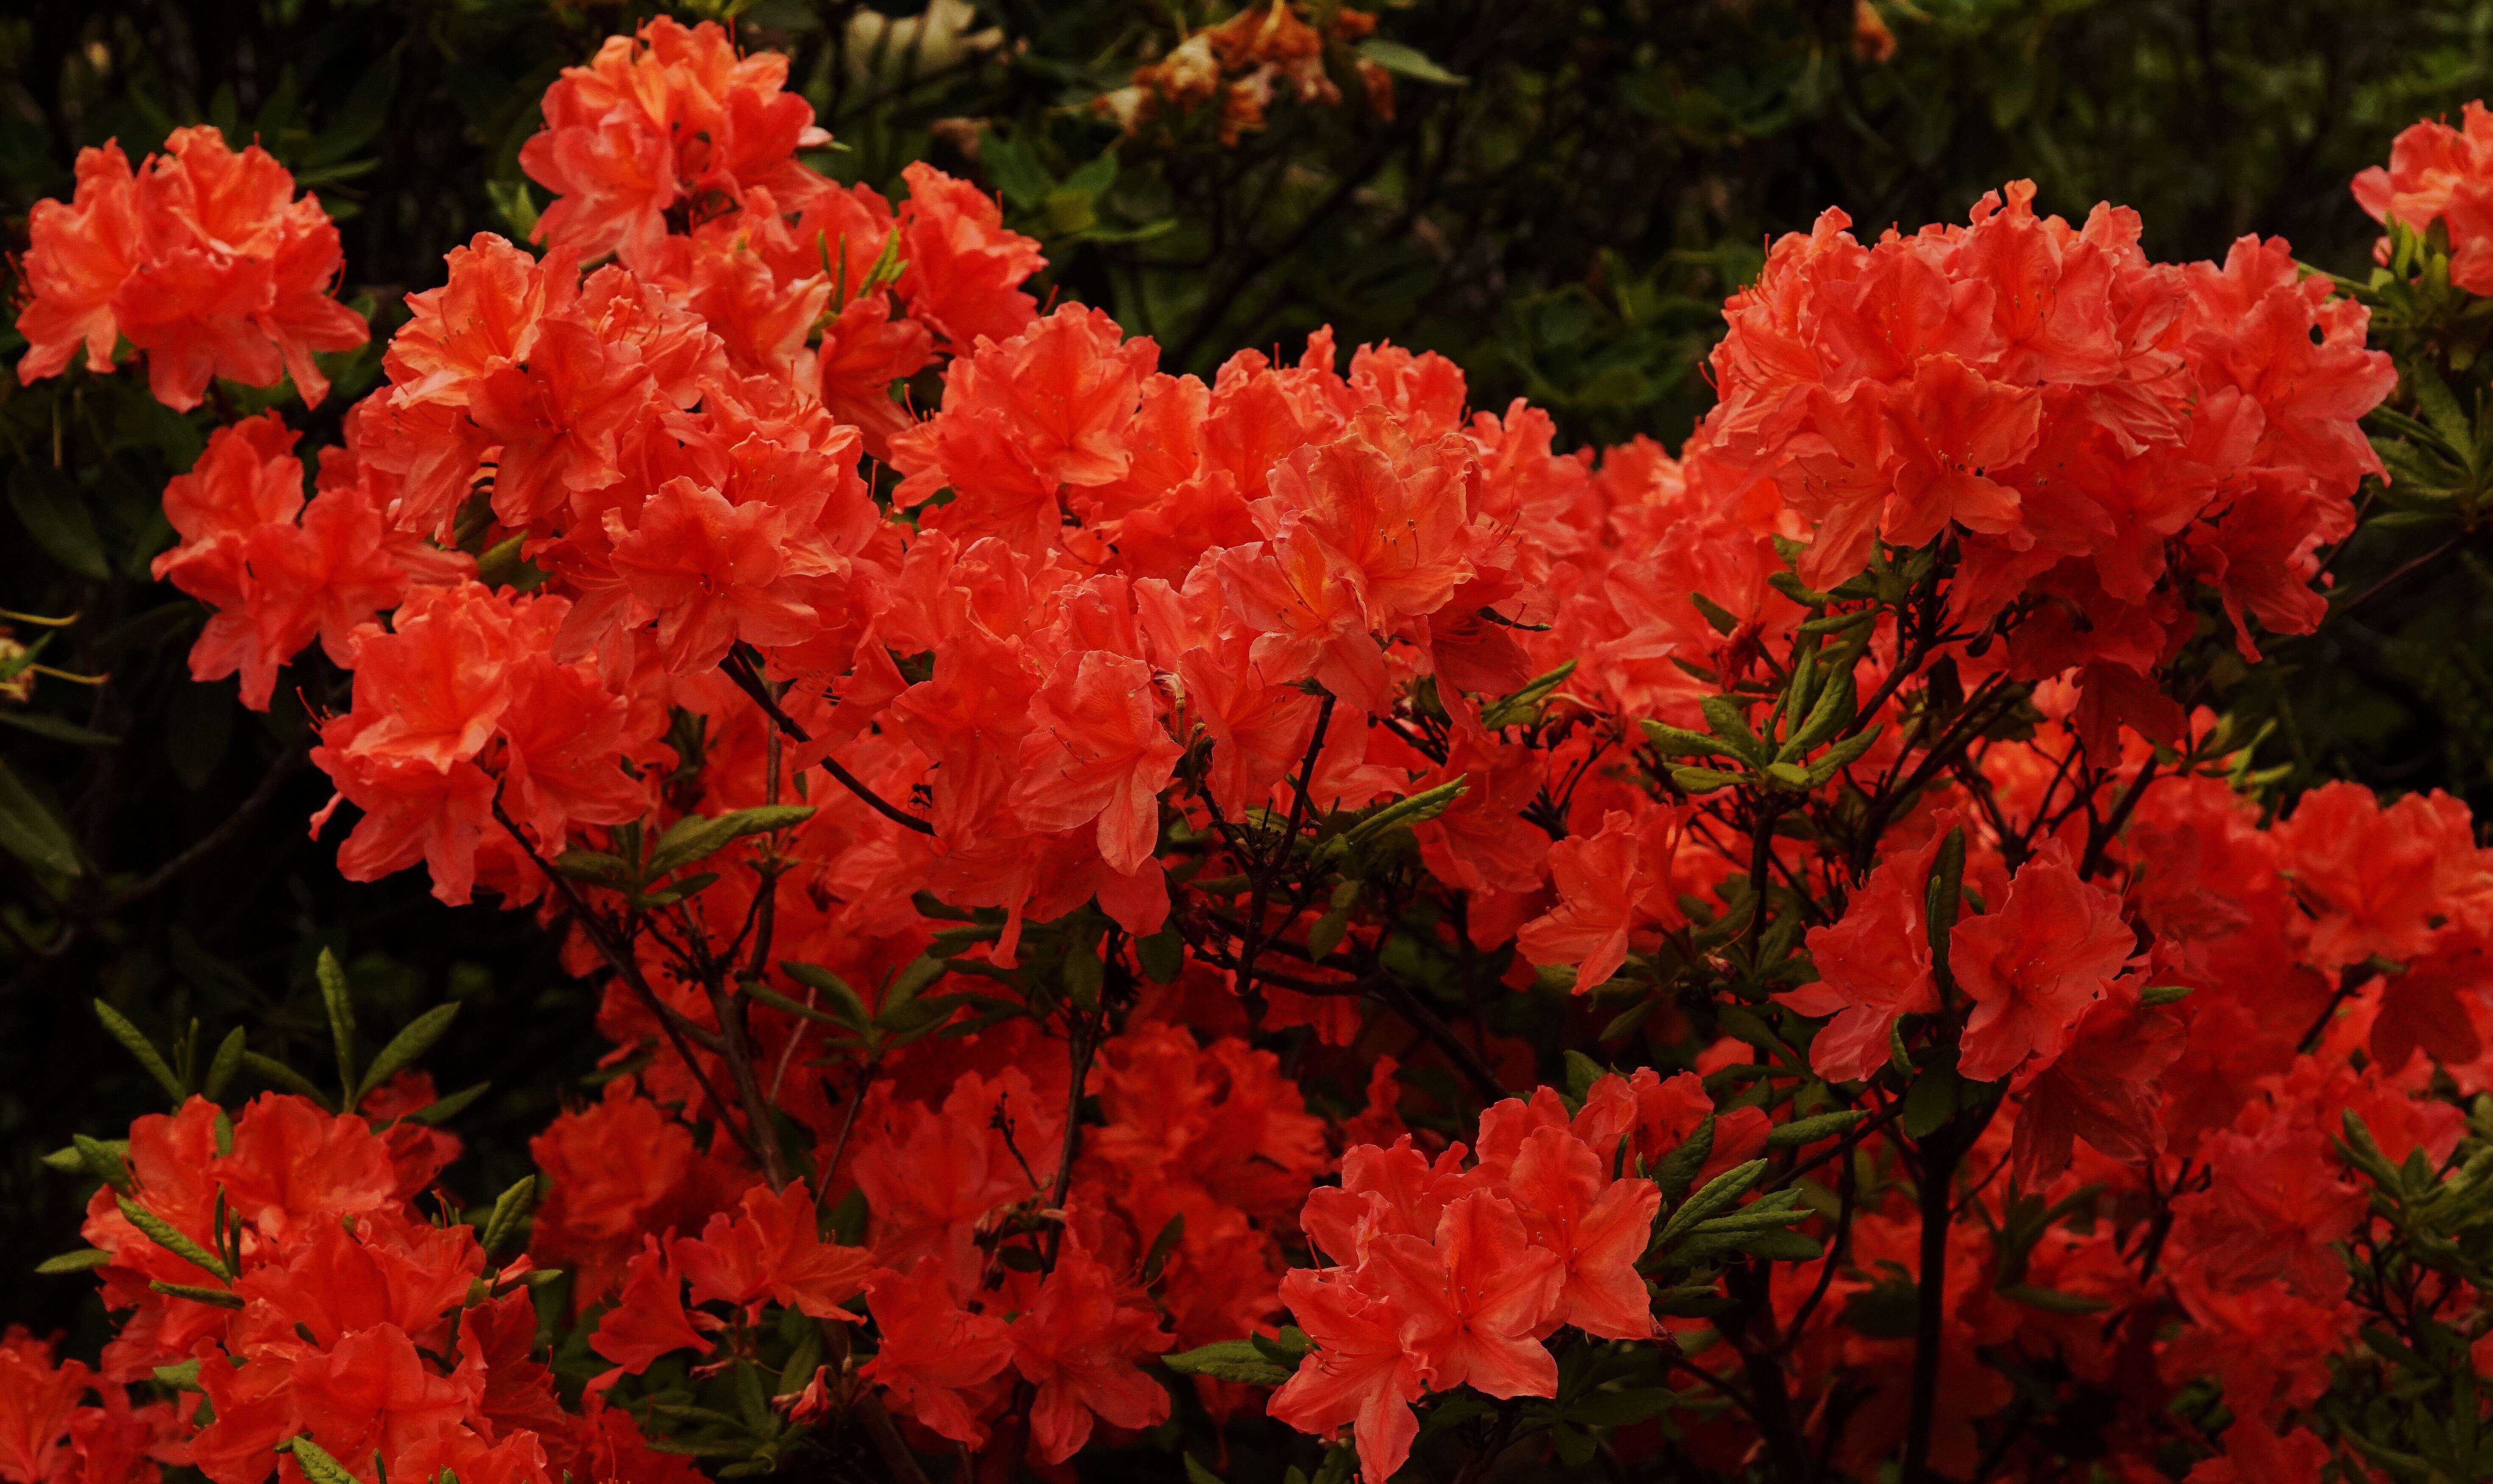 Image of Rhododendron molle (Bl.) G. Don